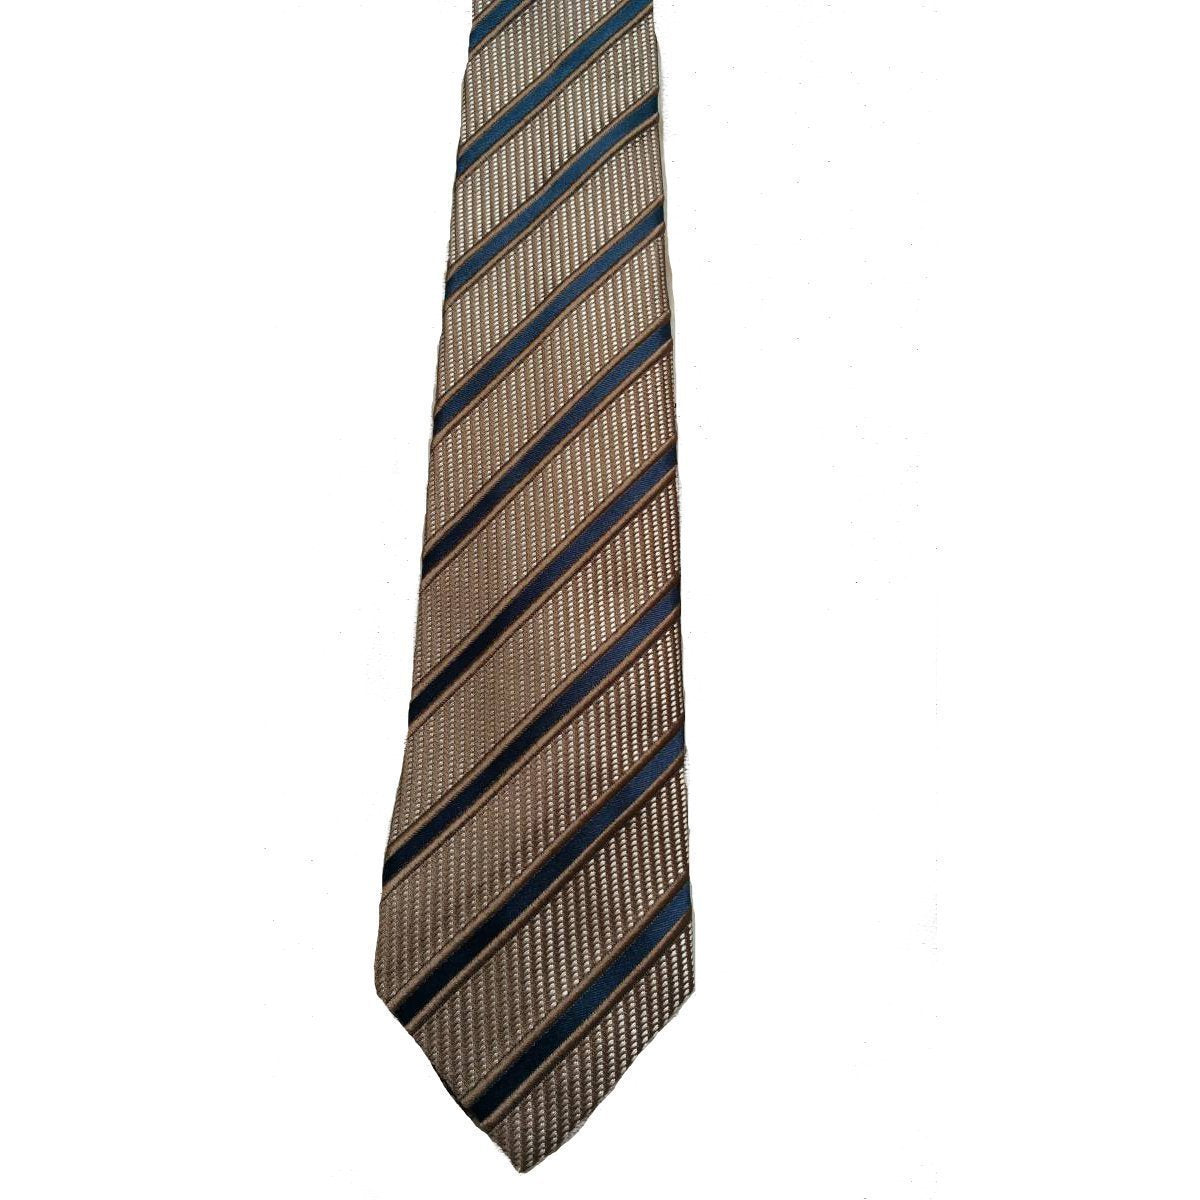 Gucci Men's Classic Tie White Camel Blue Striped Luxury Necktie 408862 at_Queen_Bee_of_Beverly_Hills